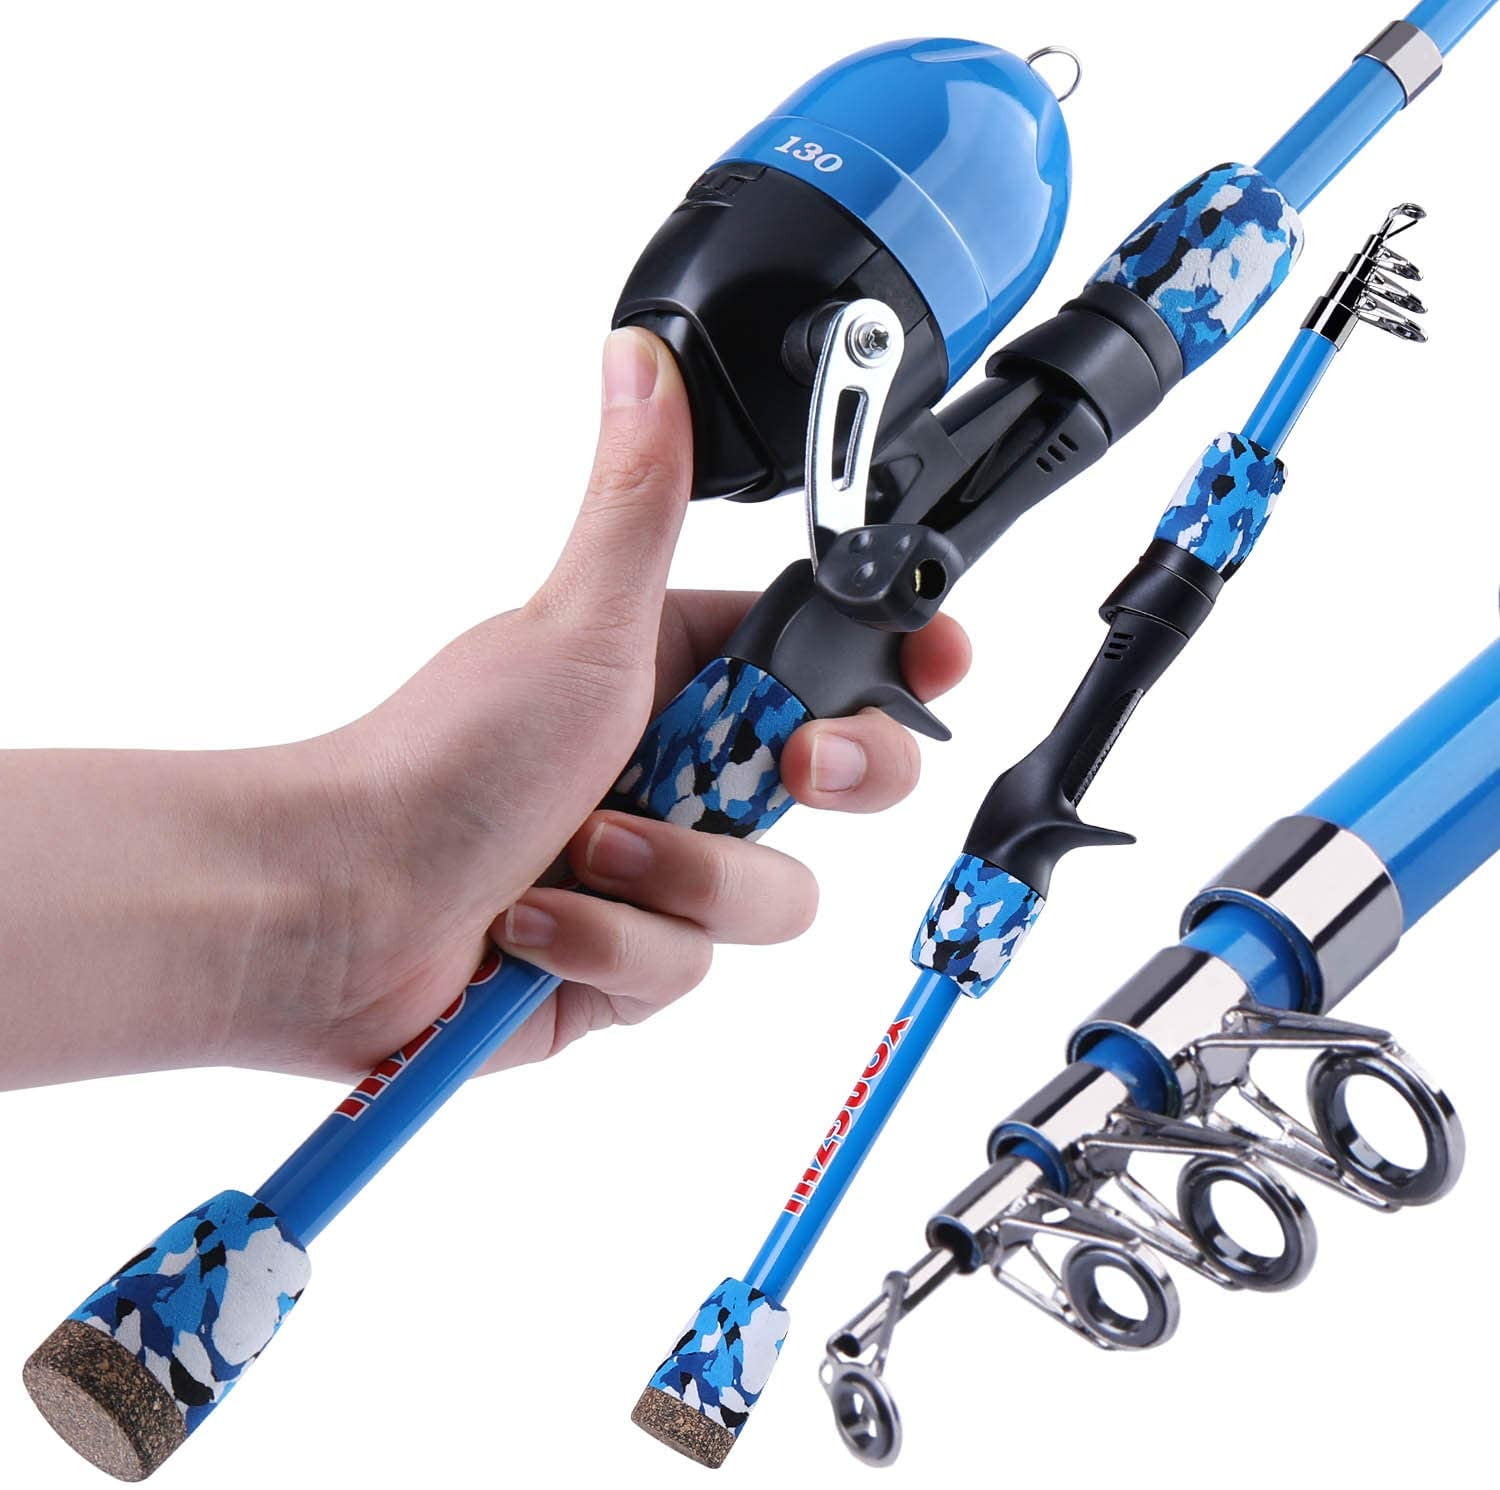 Kids Fishing Pole Reel Combos, Ultralight Telescopic 1.2m/4ft Fishing Rod + Spinning Reel + Spincast Baits + Fishing Line with Portable Tackle Box for